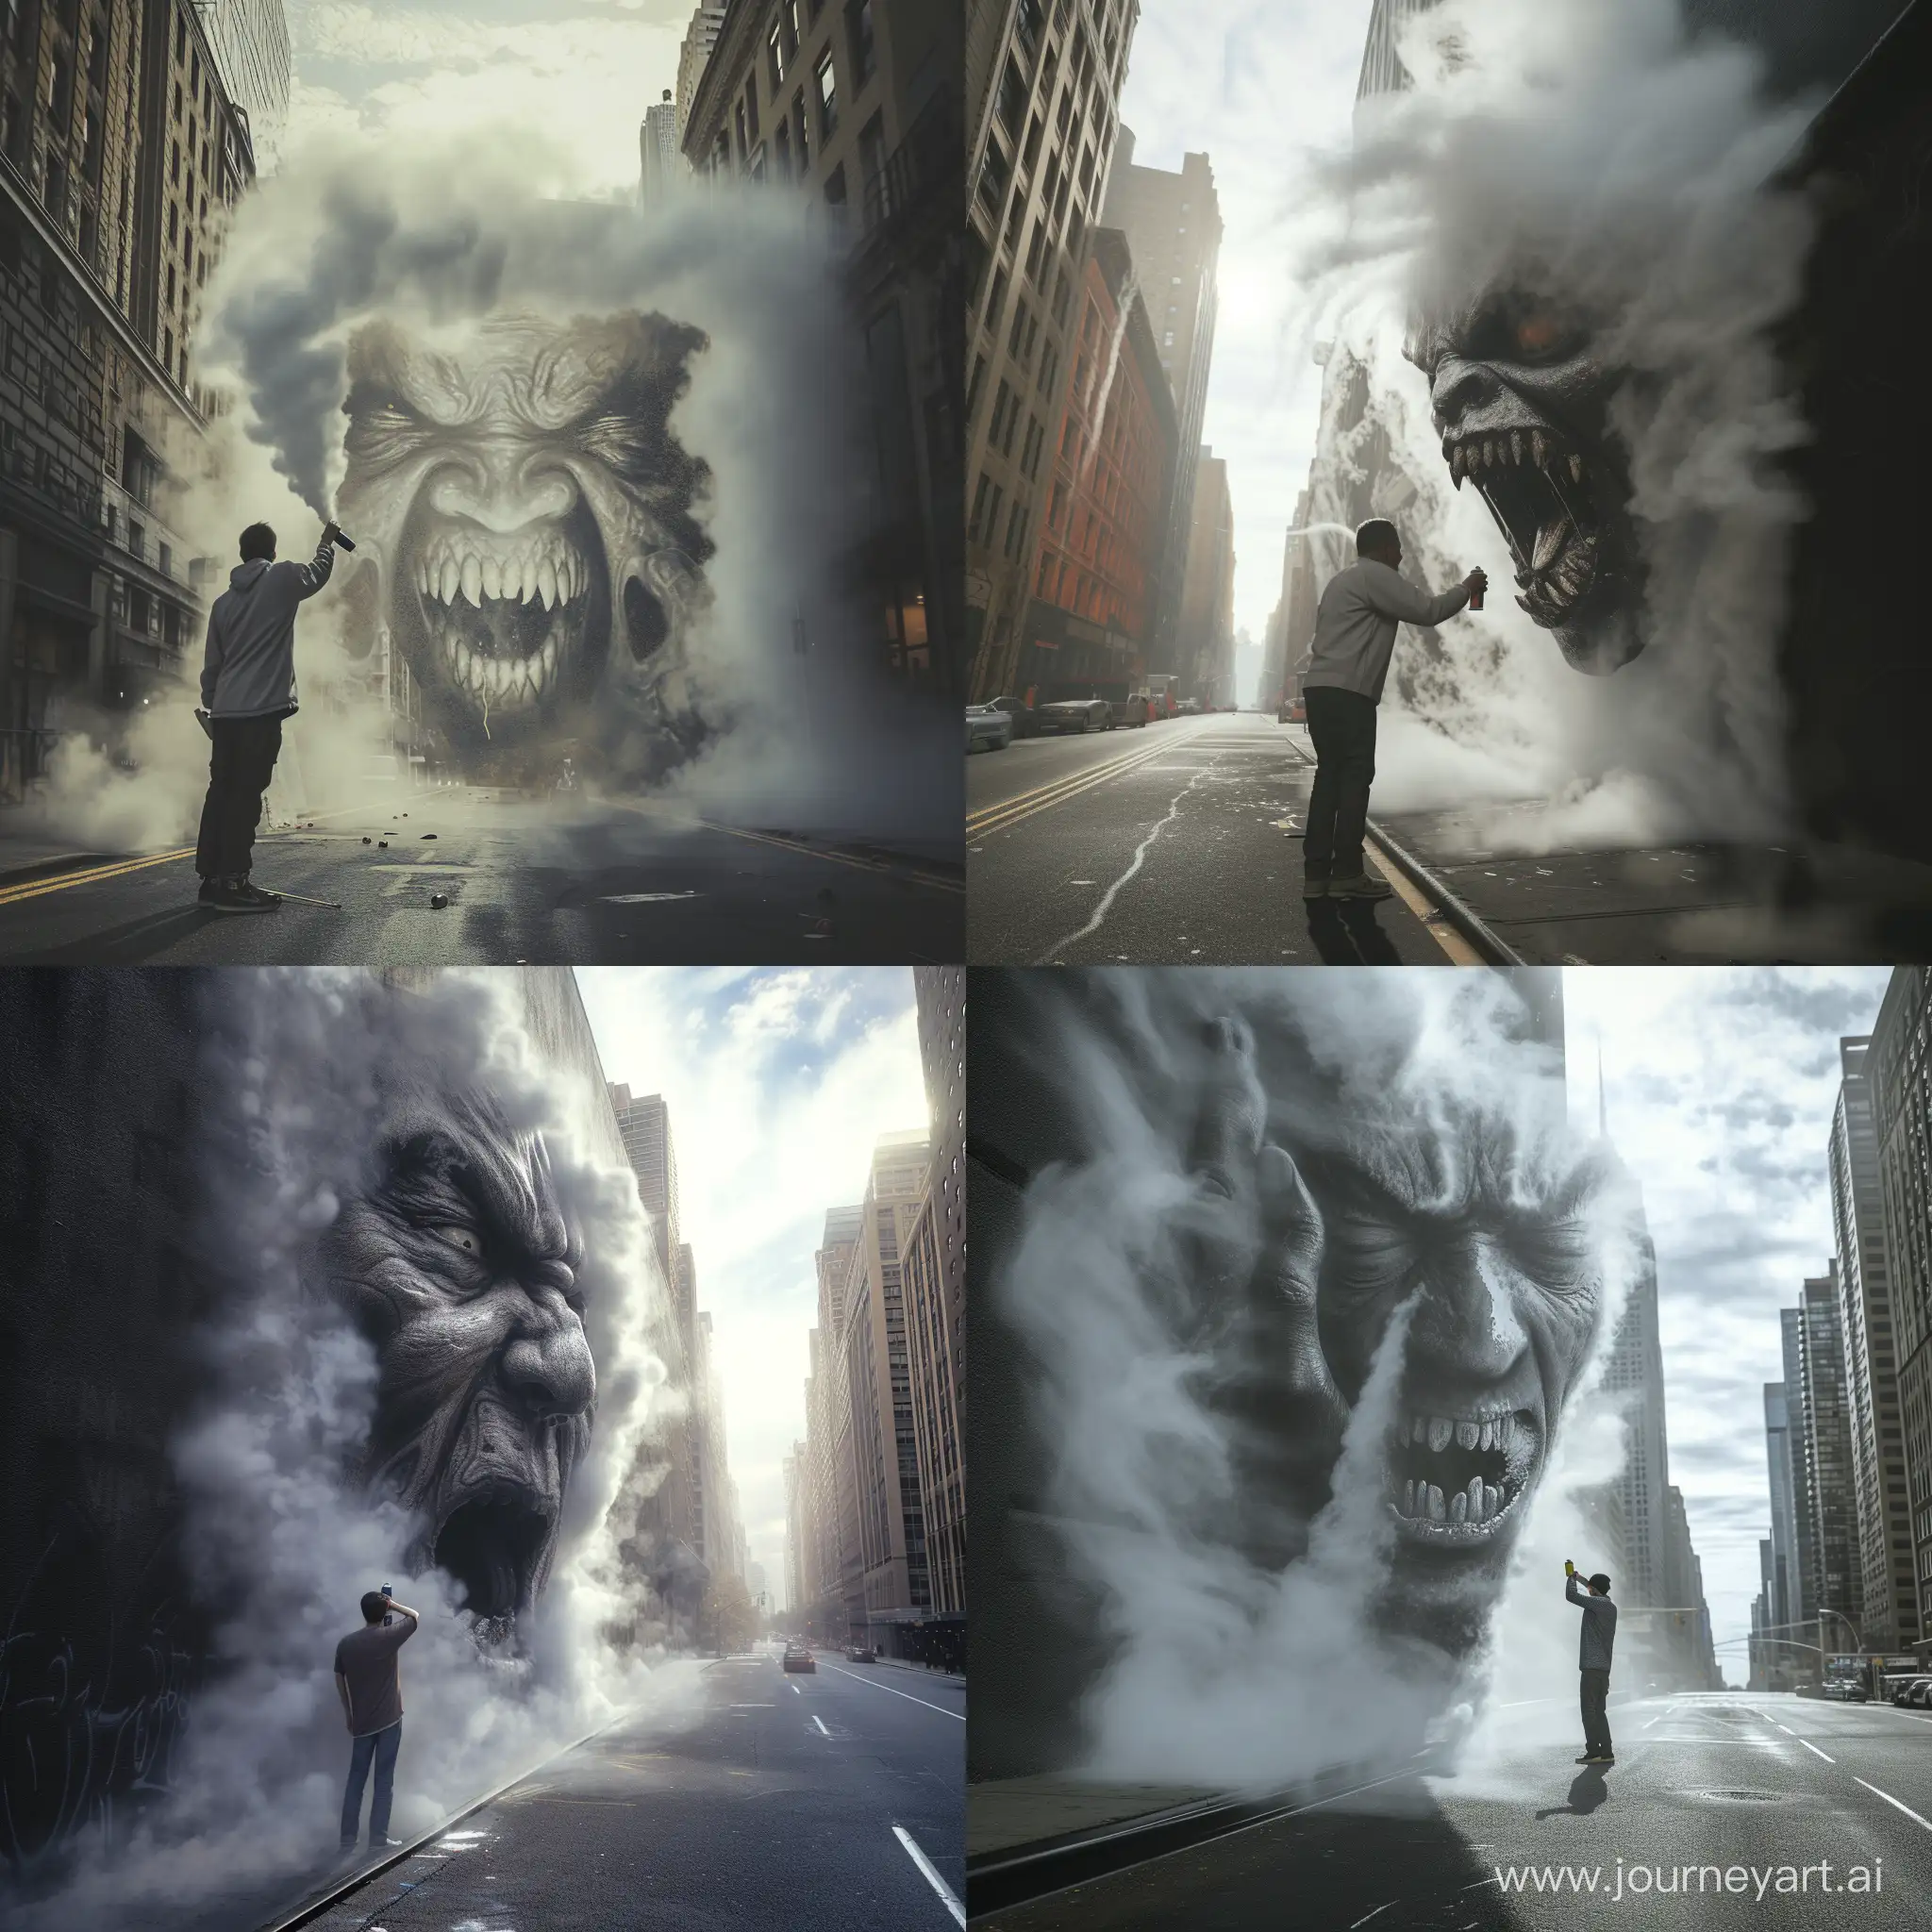 raw 8k A man is painting a wall with a spray can on a New York street, steam a scary face like a scene from a movie standing　is coming out from the road around him. 3D